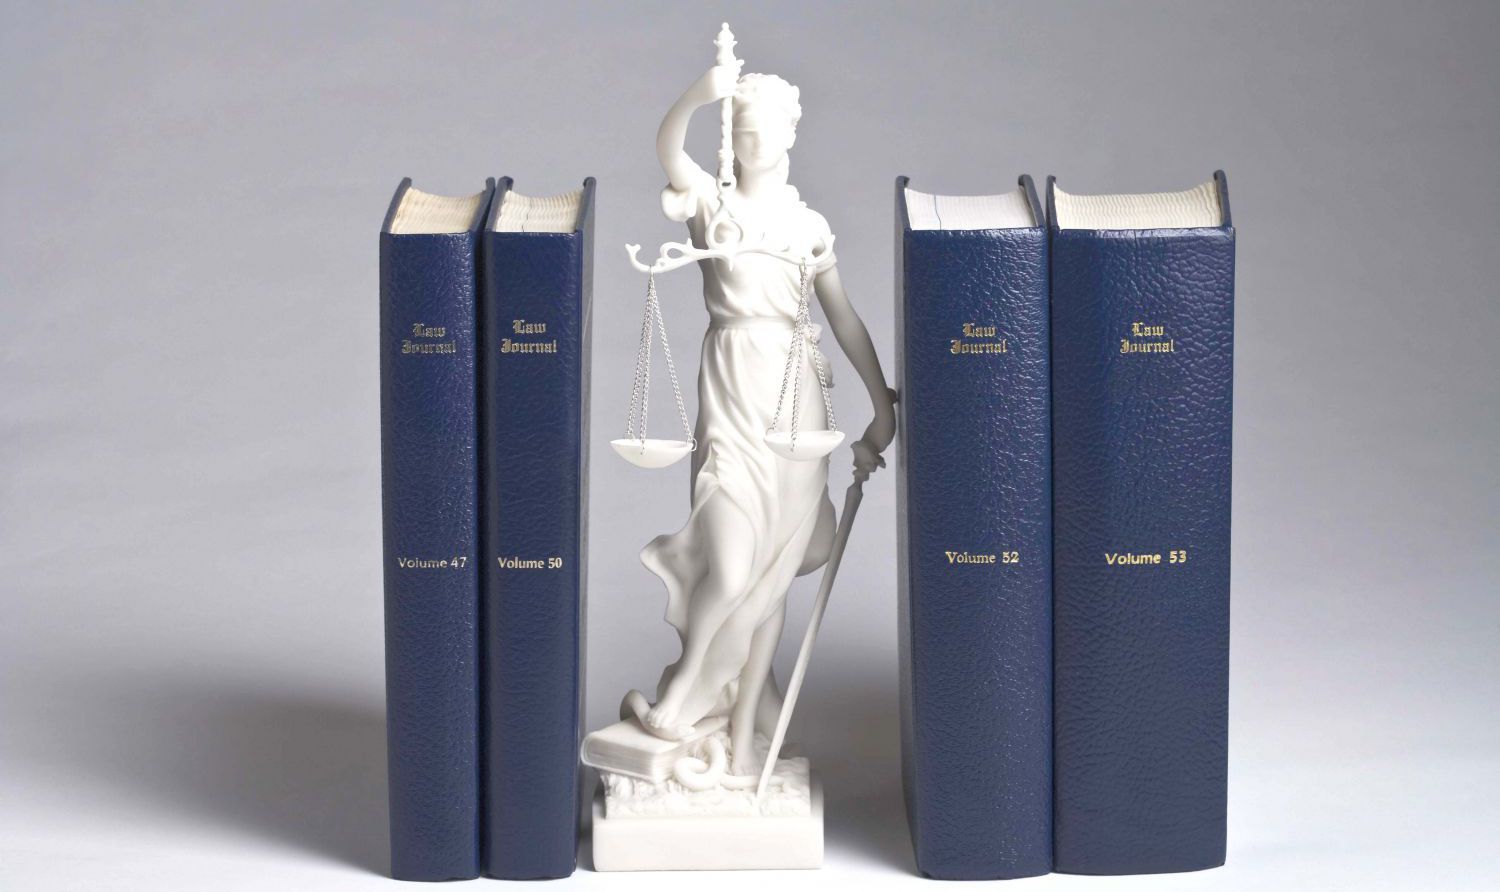 Legal books for legal support in Commerce, GA